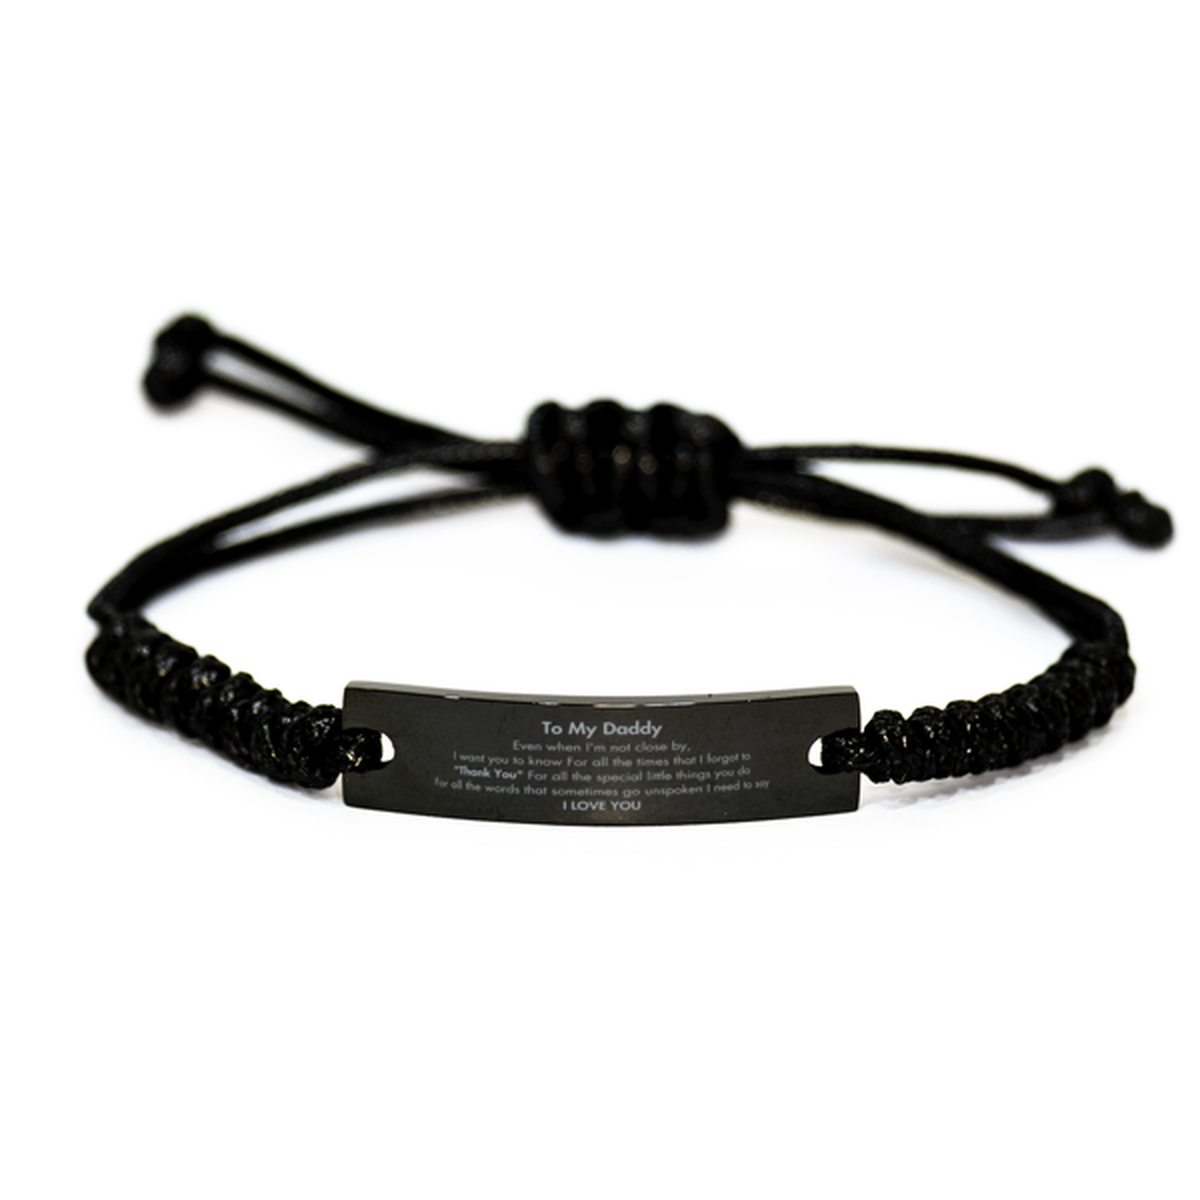 Thank You Gifts for Daddy, Keepsake Black Rope Bracelet Gifts for Daddy Birthday Mother's day Father's Day Daddy For all the words That sometimes go unspoken I need to say I LOVE YOU